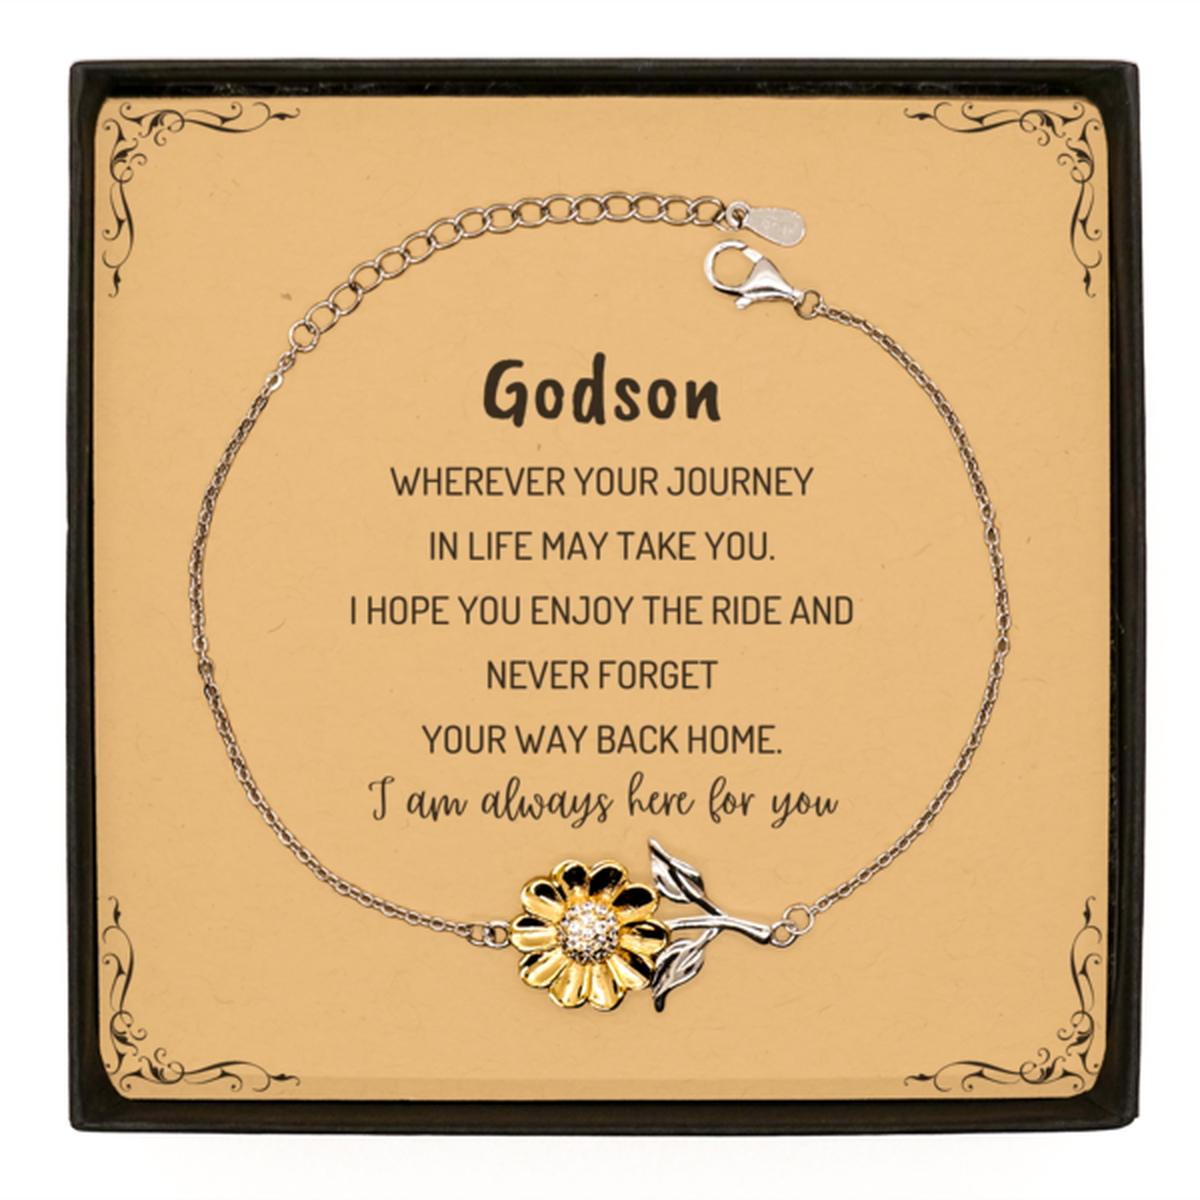 Godson wherever your journey in life may take you, I am always here for you Godson Sunflower Bracelet, Awesome Christmas Gifts For Godson Message Card, Godson Birthday Gifts for Men Women Family Loved One